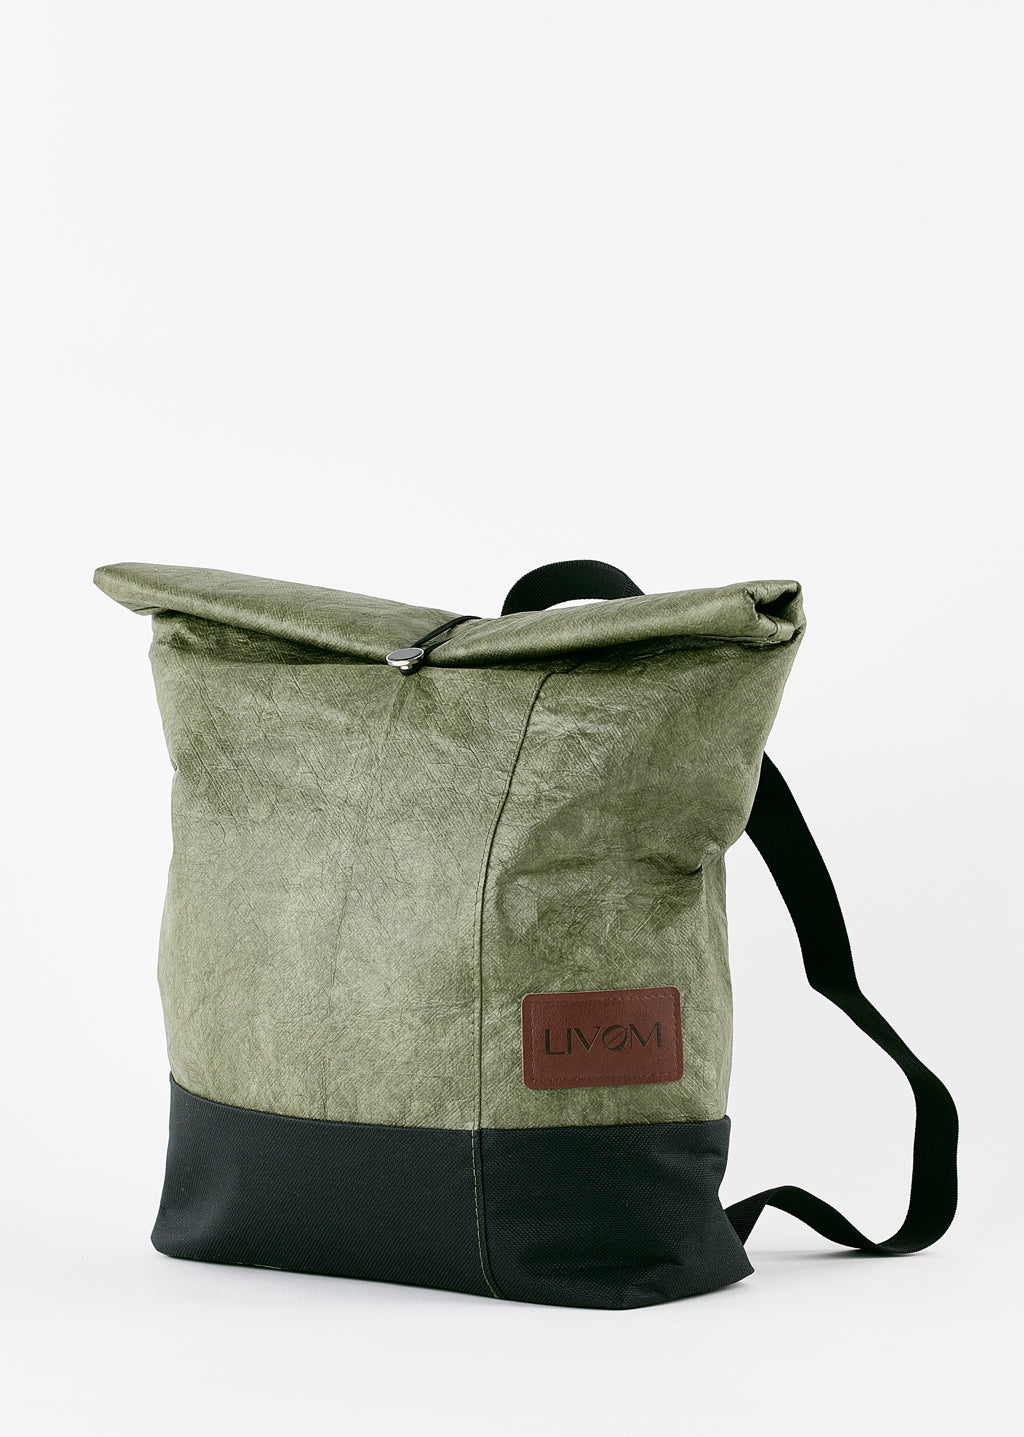 Tyveck Lunch Bag